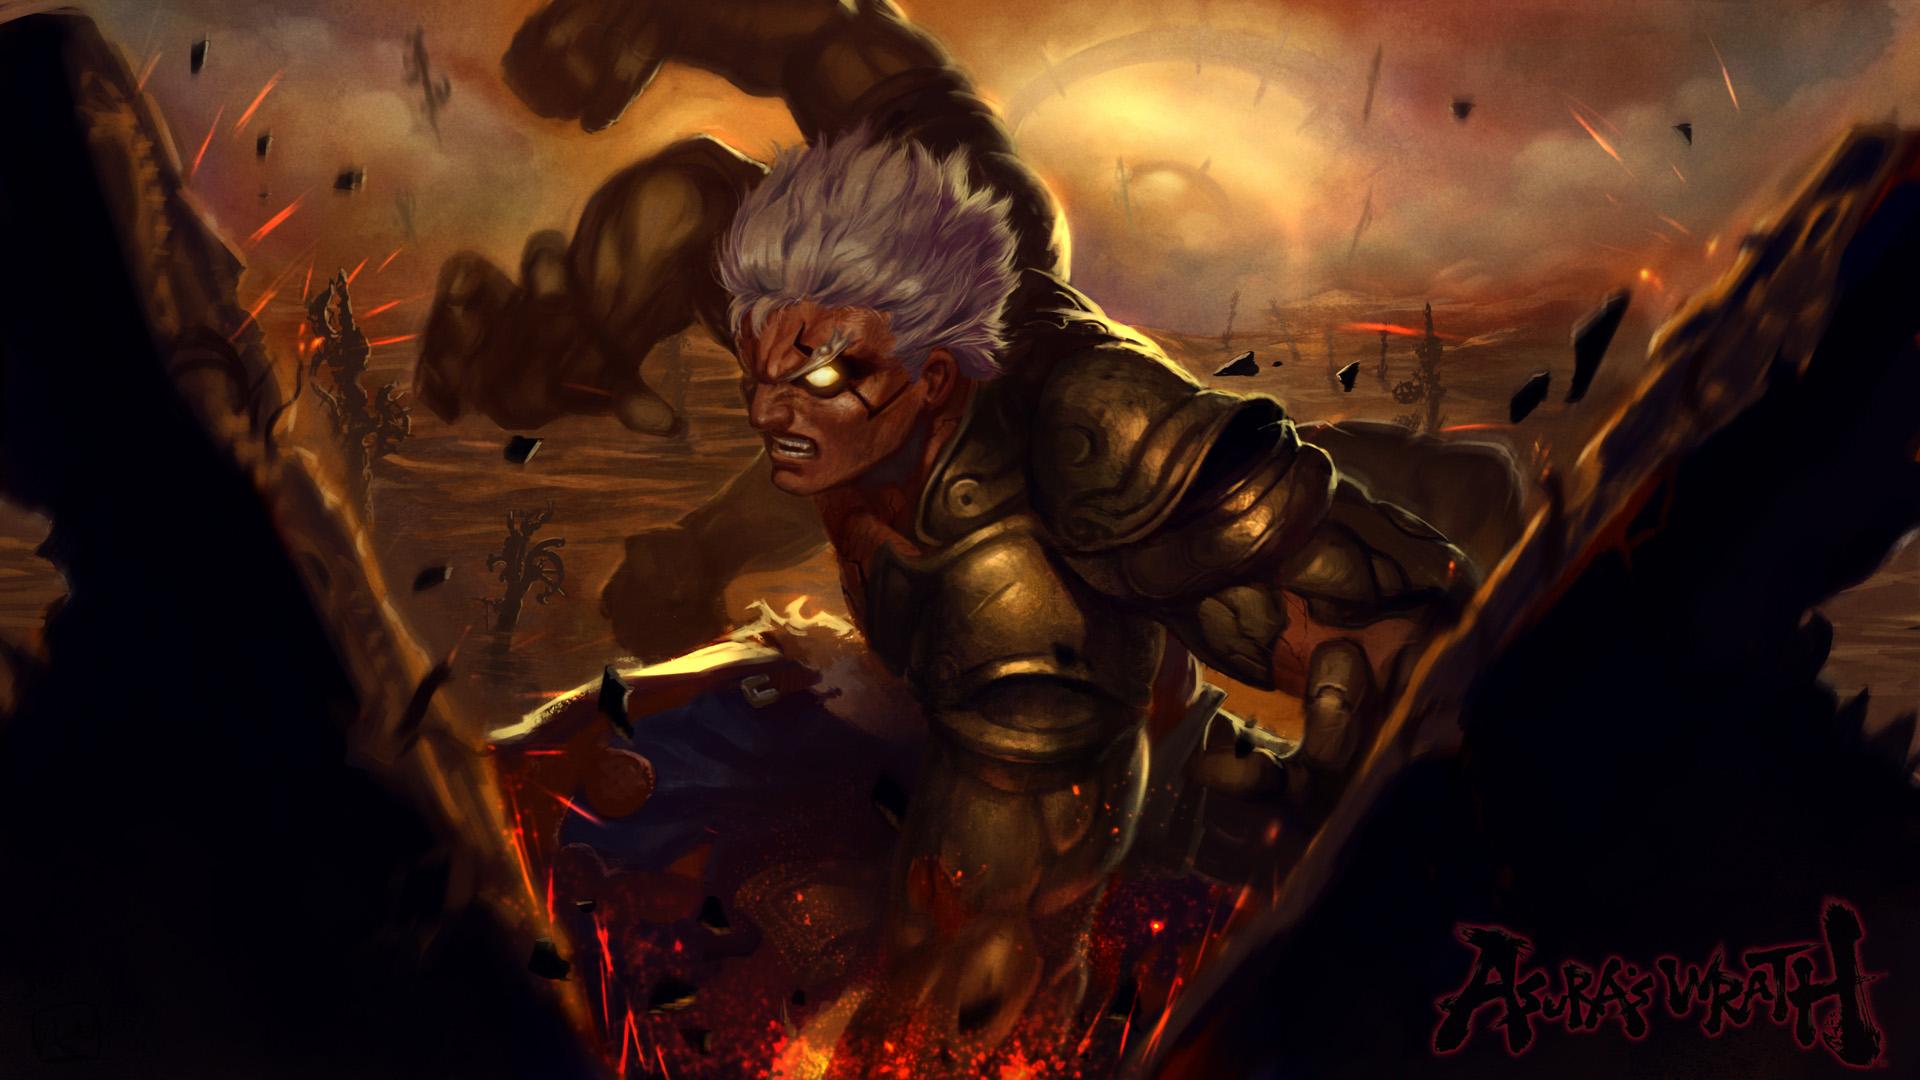 Asura's Wrath HD Wallpapers and Backgrounds Image.